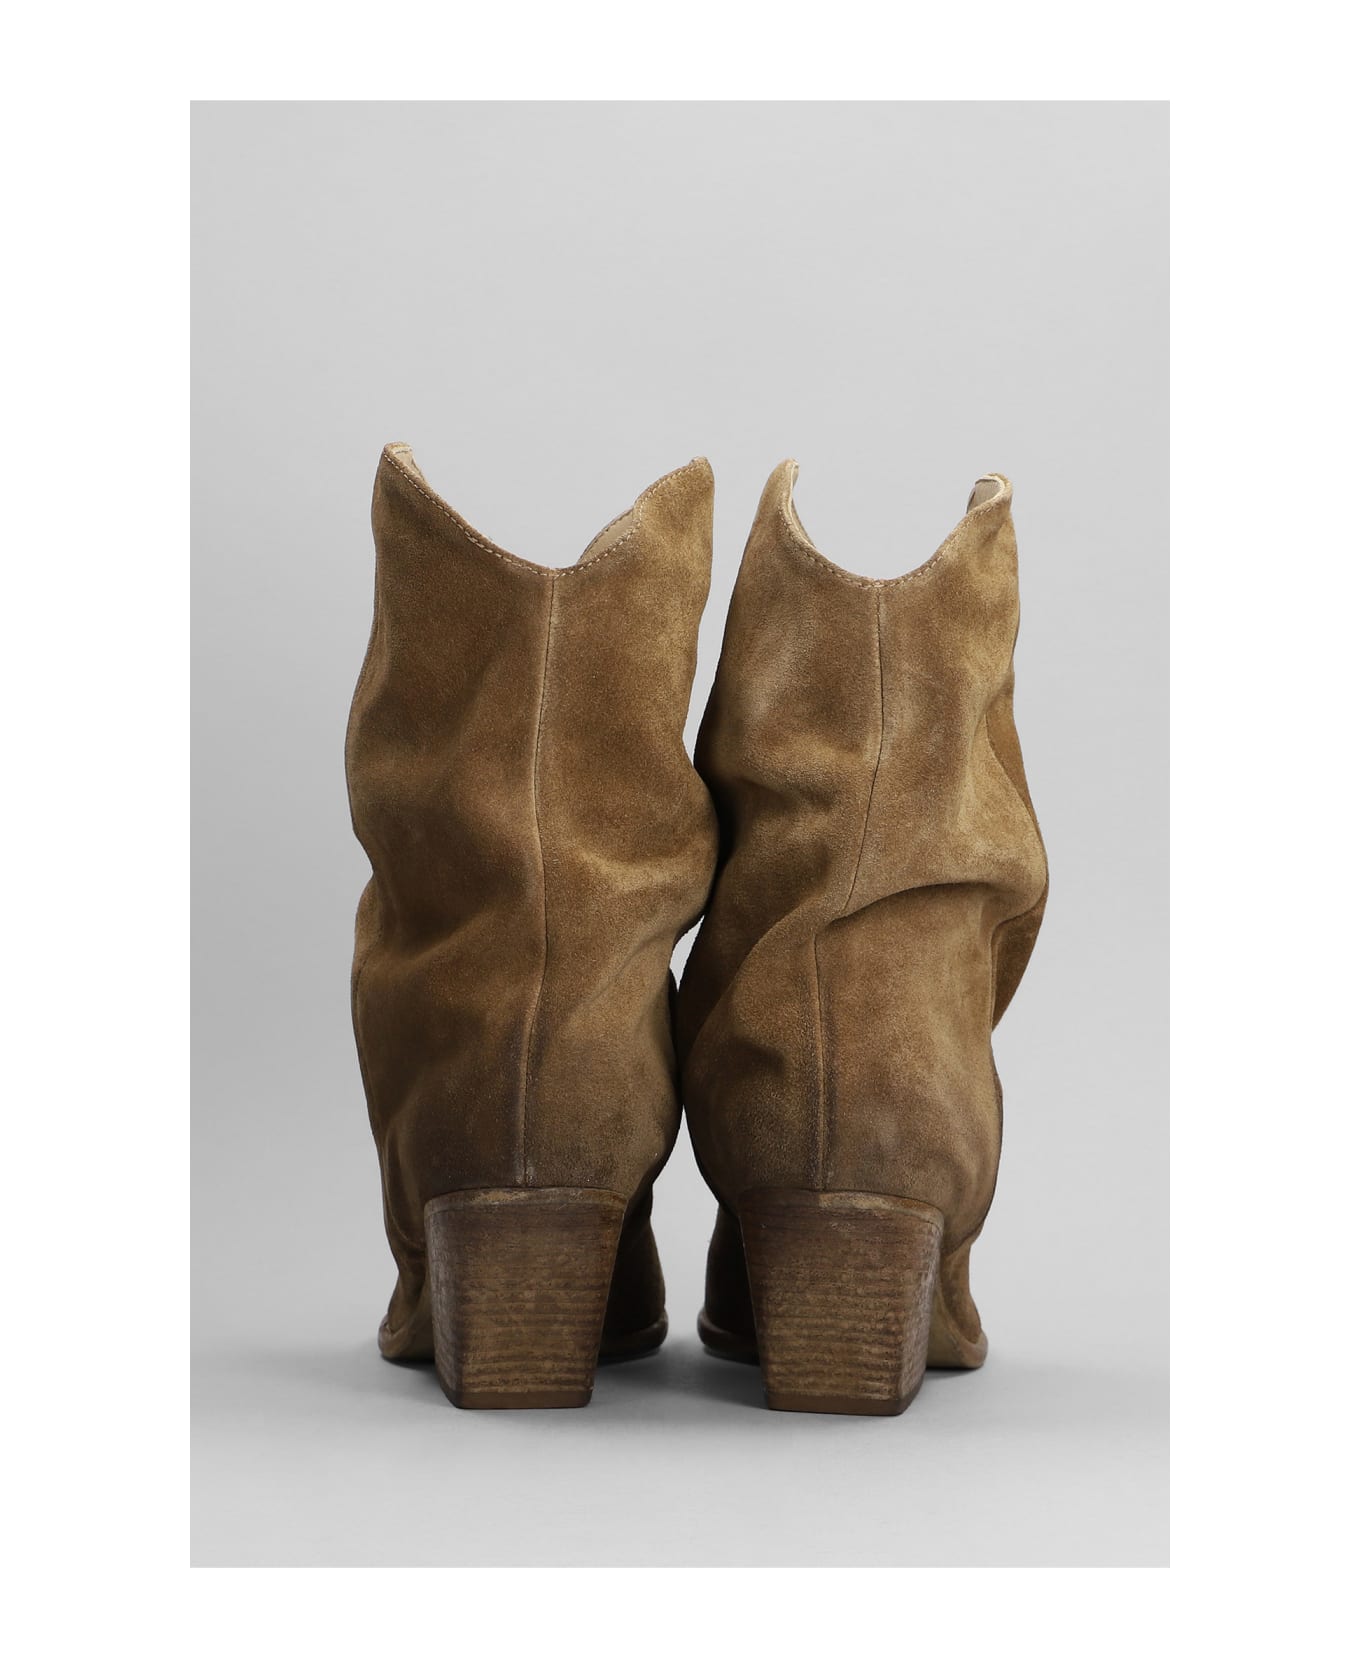 Elena Iachi Low Heels Ankle Boots In Camel Suede - Camel ブーツ